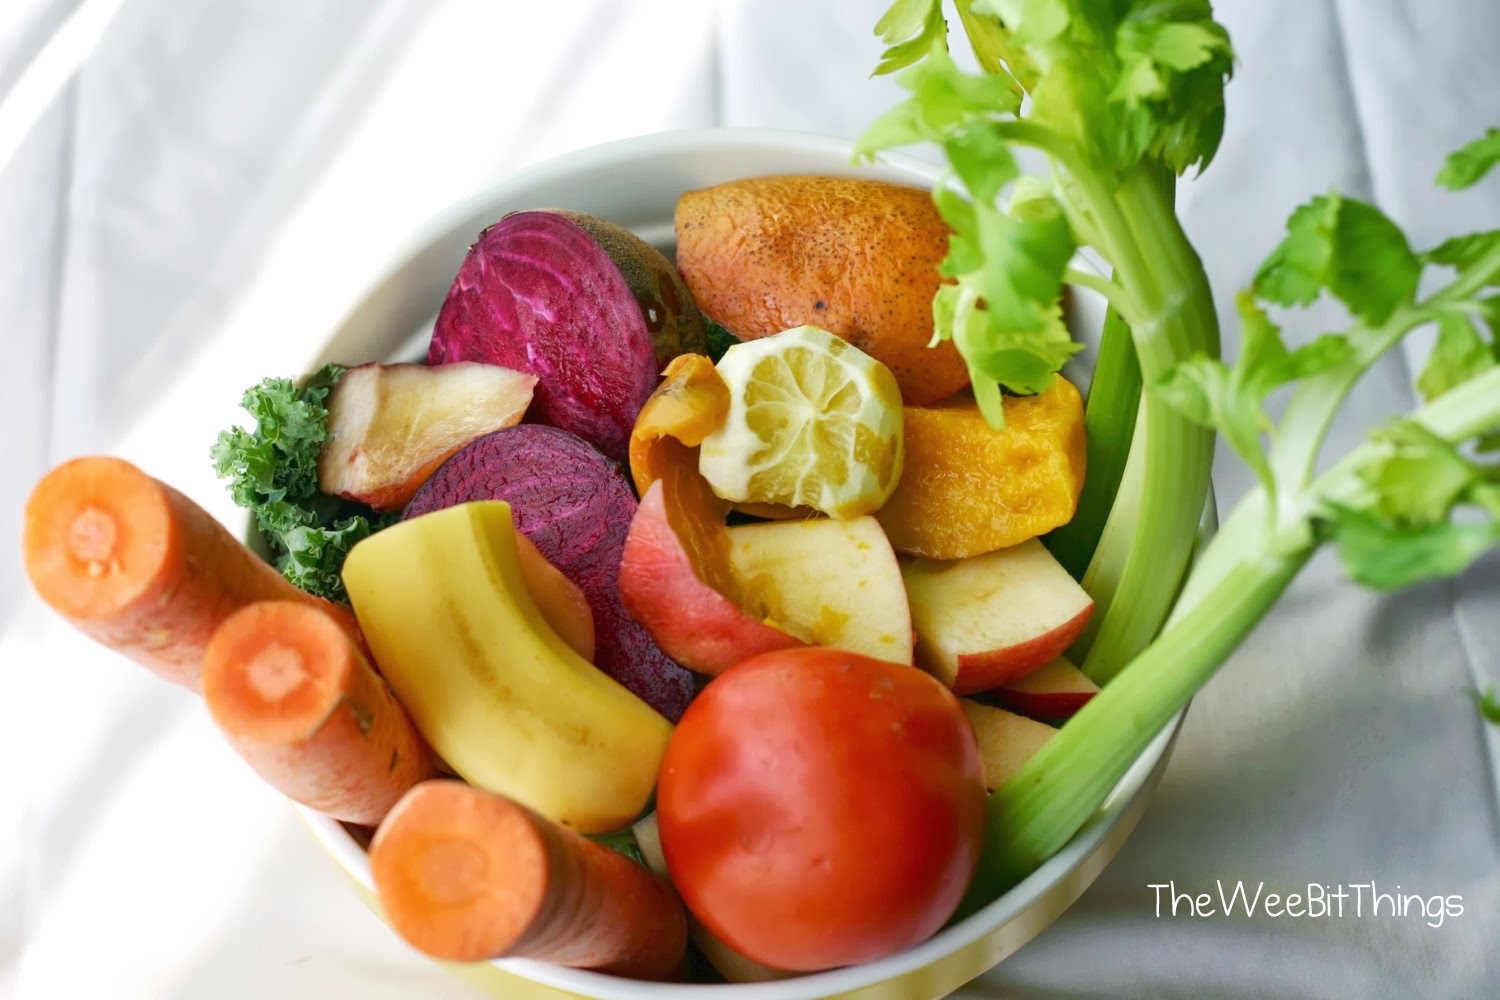 Bowl of Fruit and Vegetables